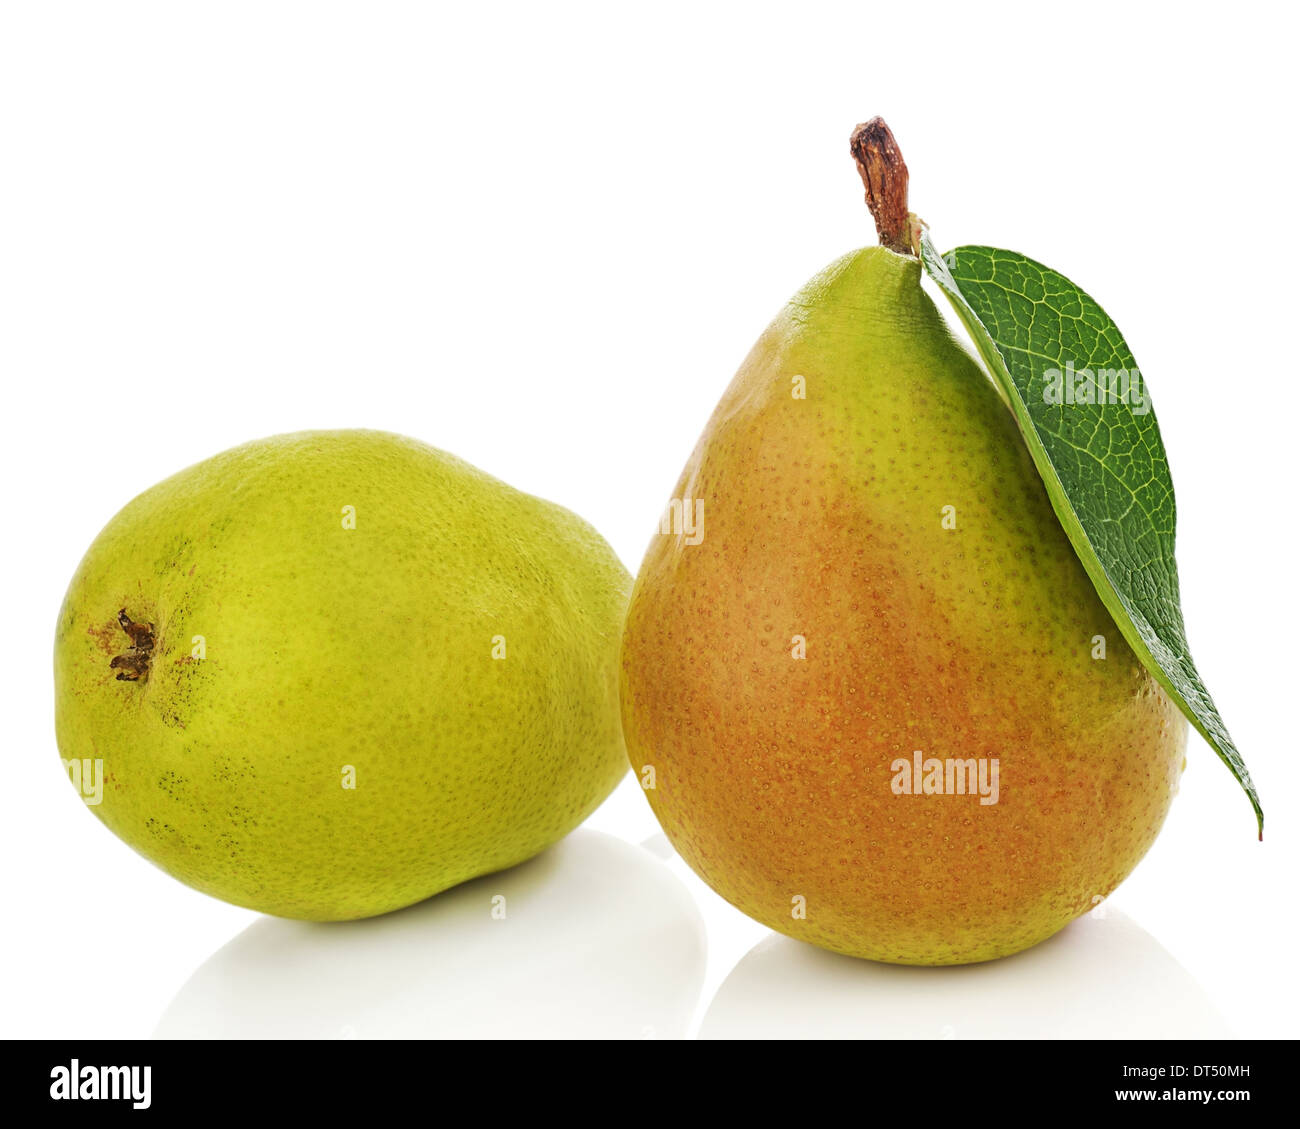 https://c8.alamy.com/comp/DT50MH/pears-with-green-leaves-isolated-on-white-background-closeup-DT50MH.jpg